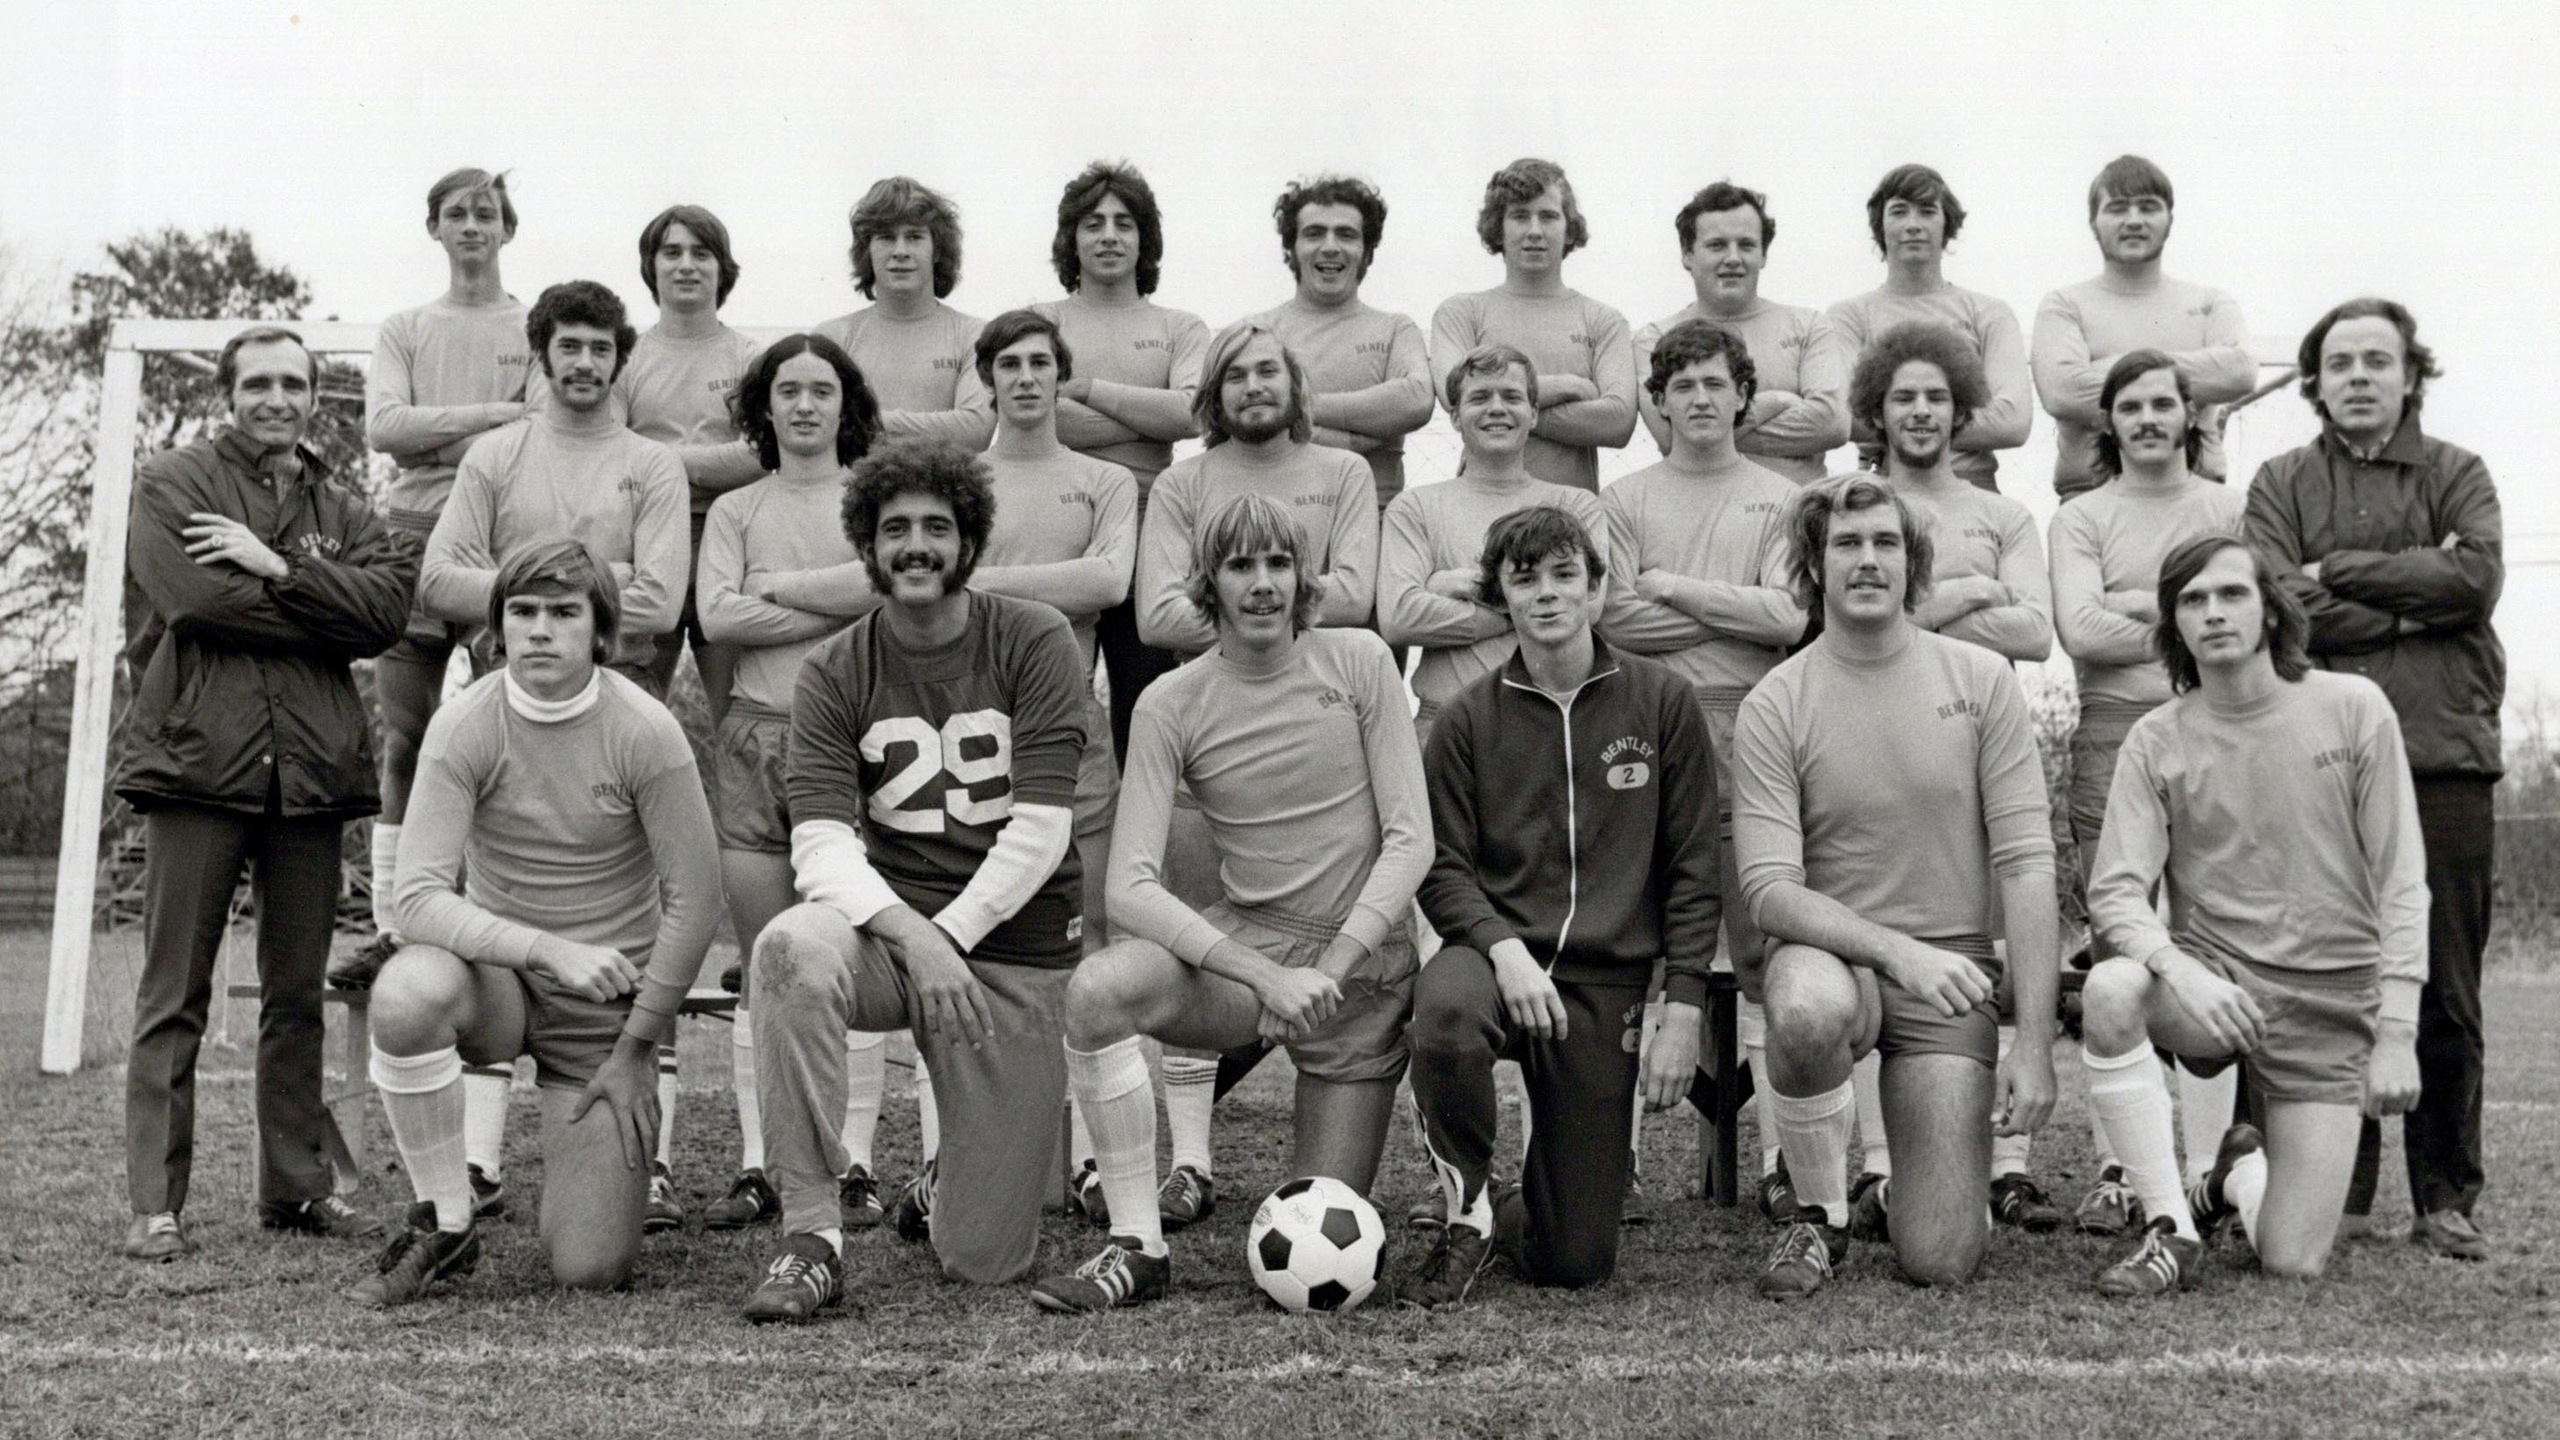 The 1972 men's soccer team, the first at Bentley.